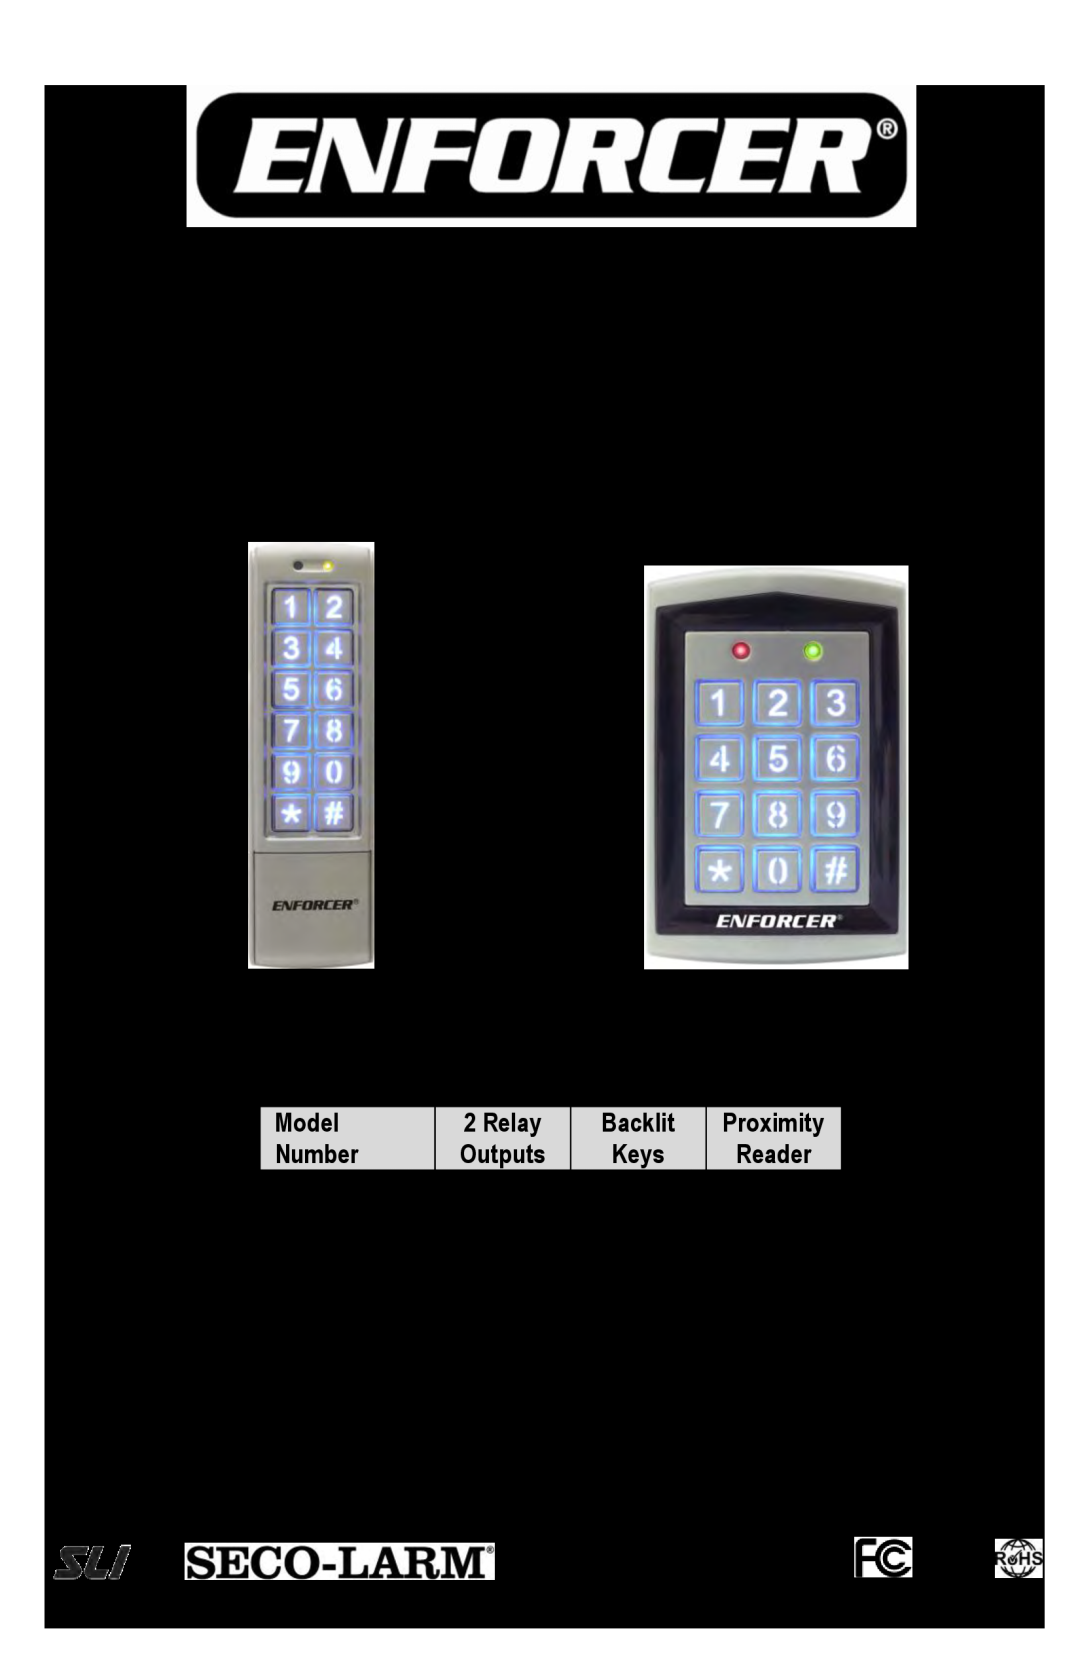 SECO-LARM USA SK-2323-SPQ user manual Outdoor Stand-AloneWeatherproof Keypads, Quick User Programming Guide, Model Number 